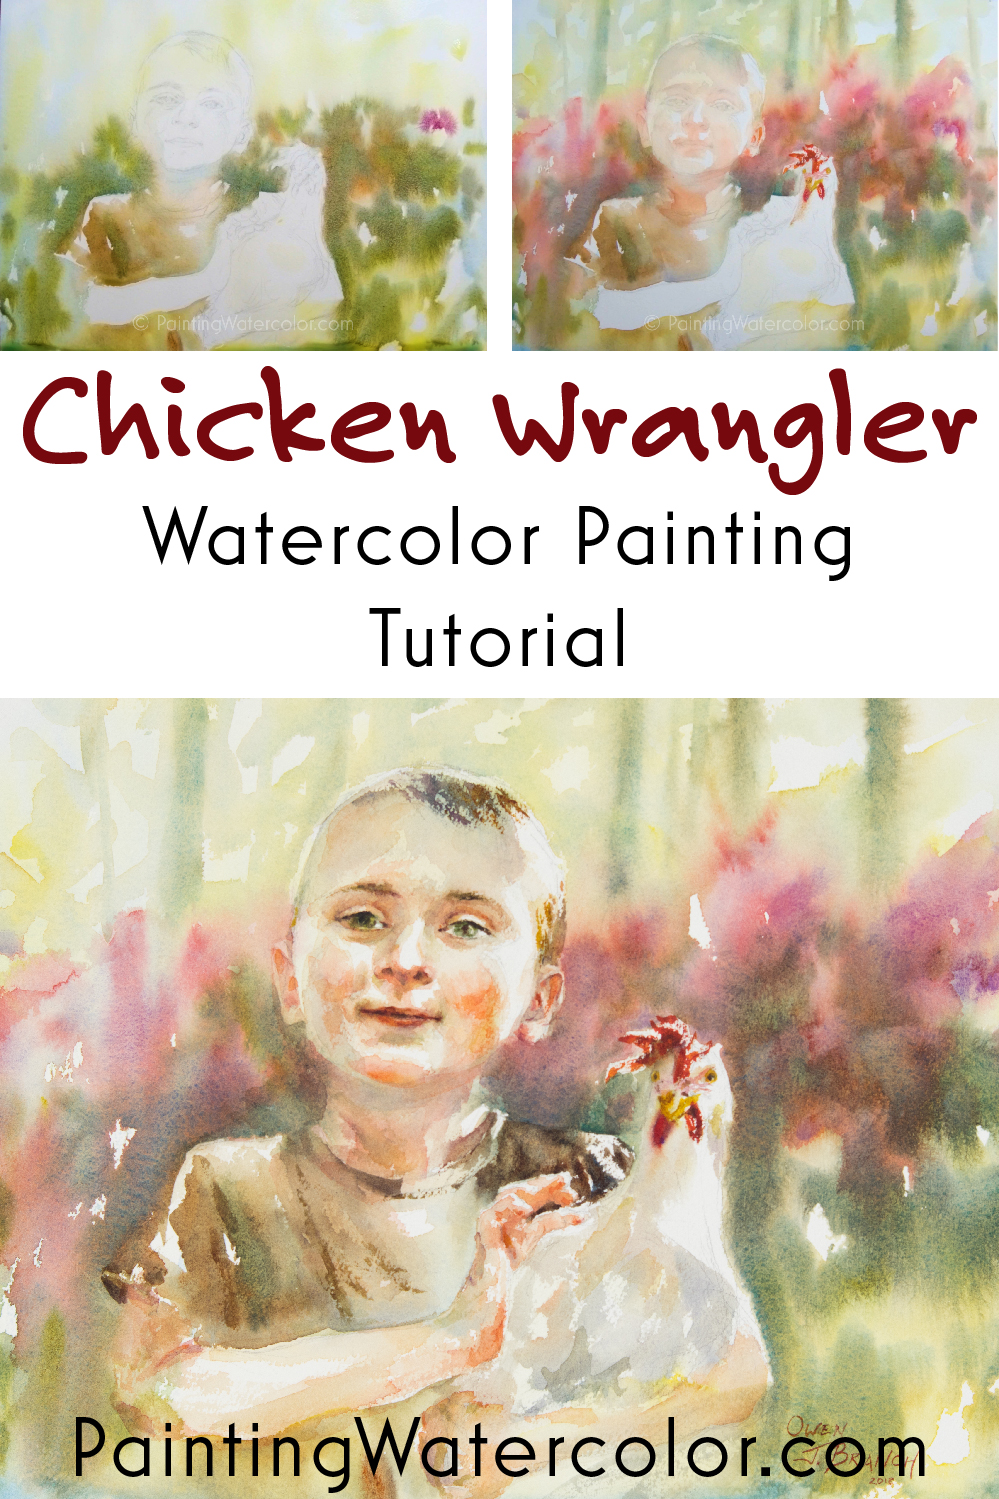 Chicken Wrangler watercolor painting tutorial by Jennifer Branch